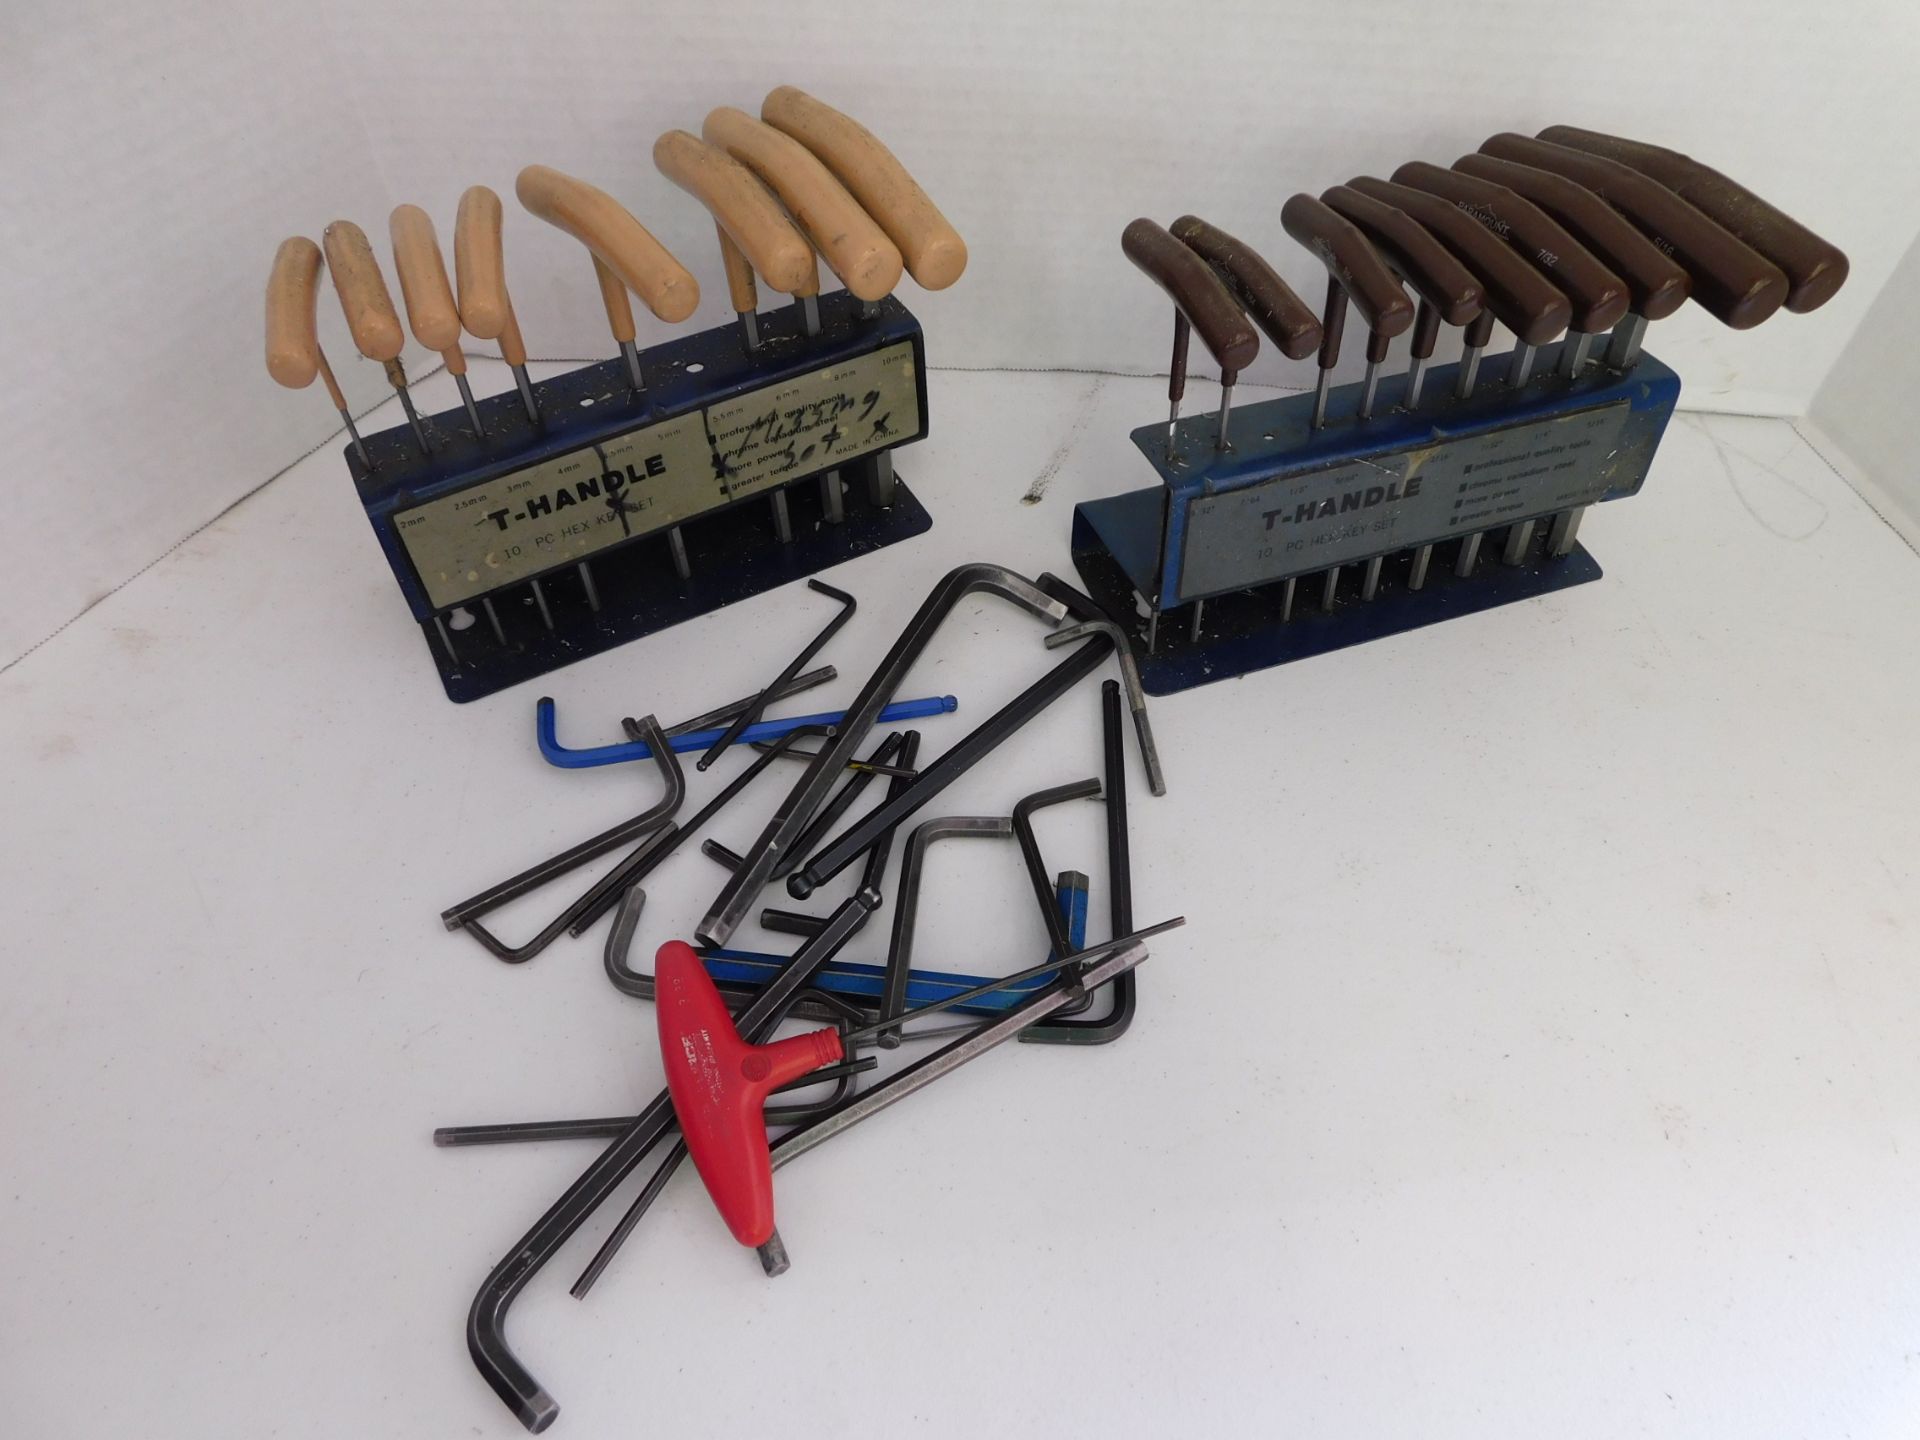 T-Handle Hex Wrench Sets and Miscellaneous Hex Wrenches